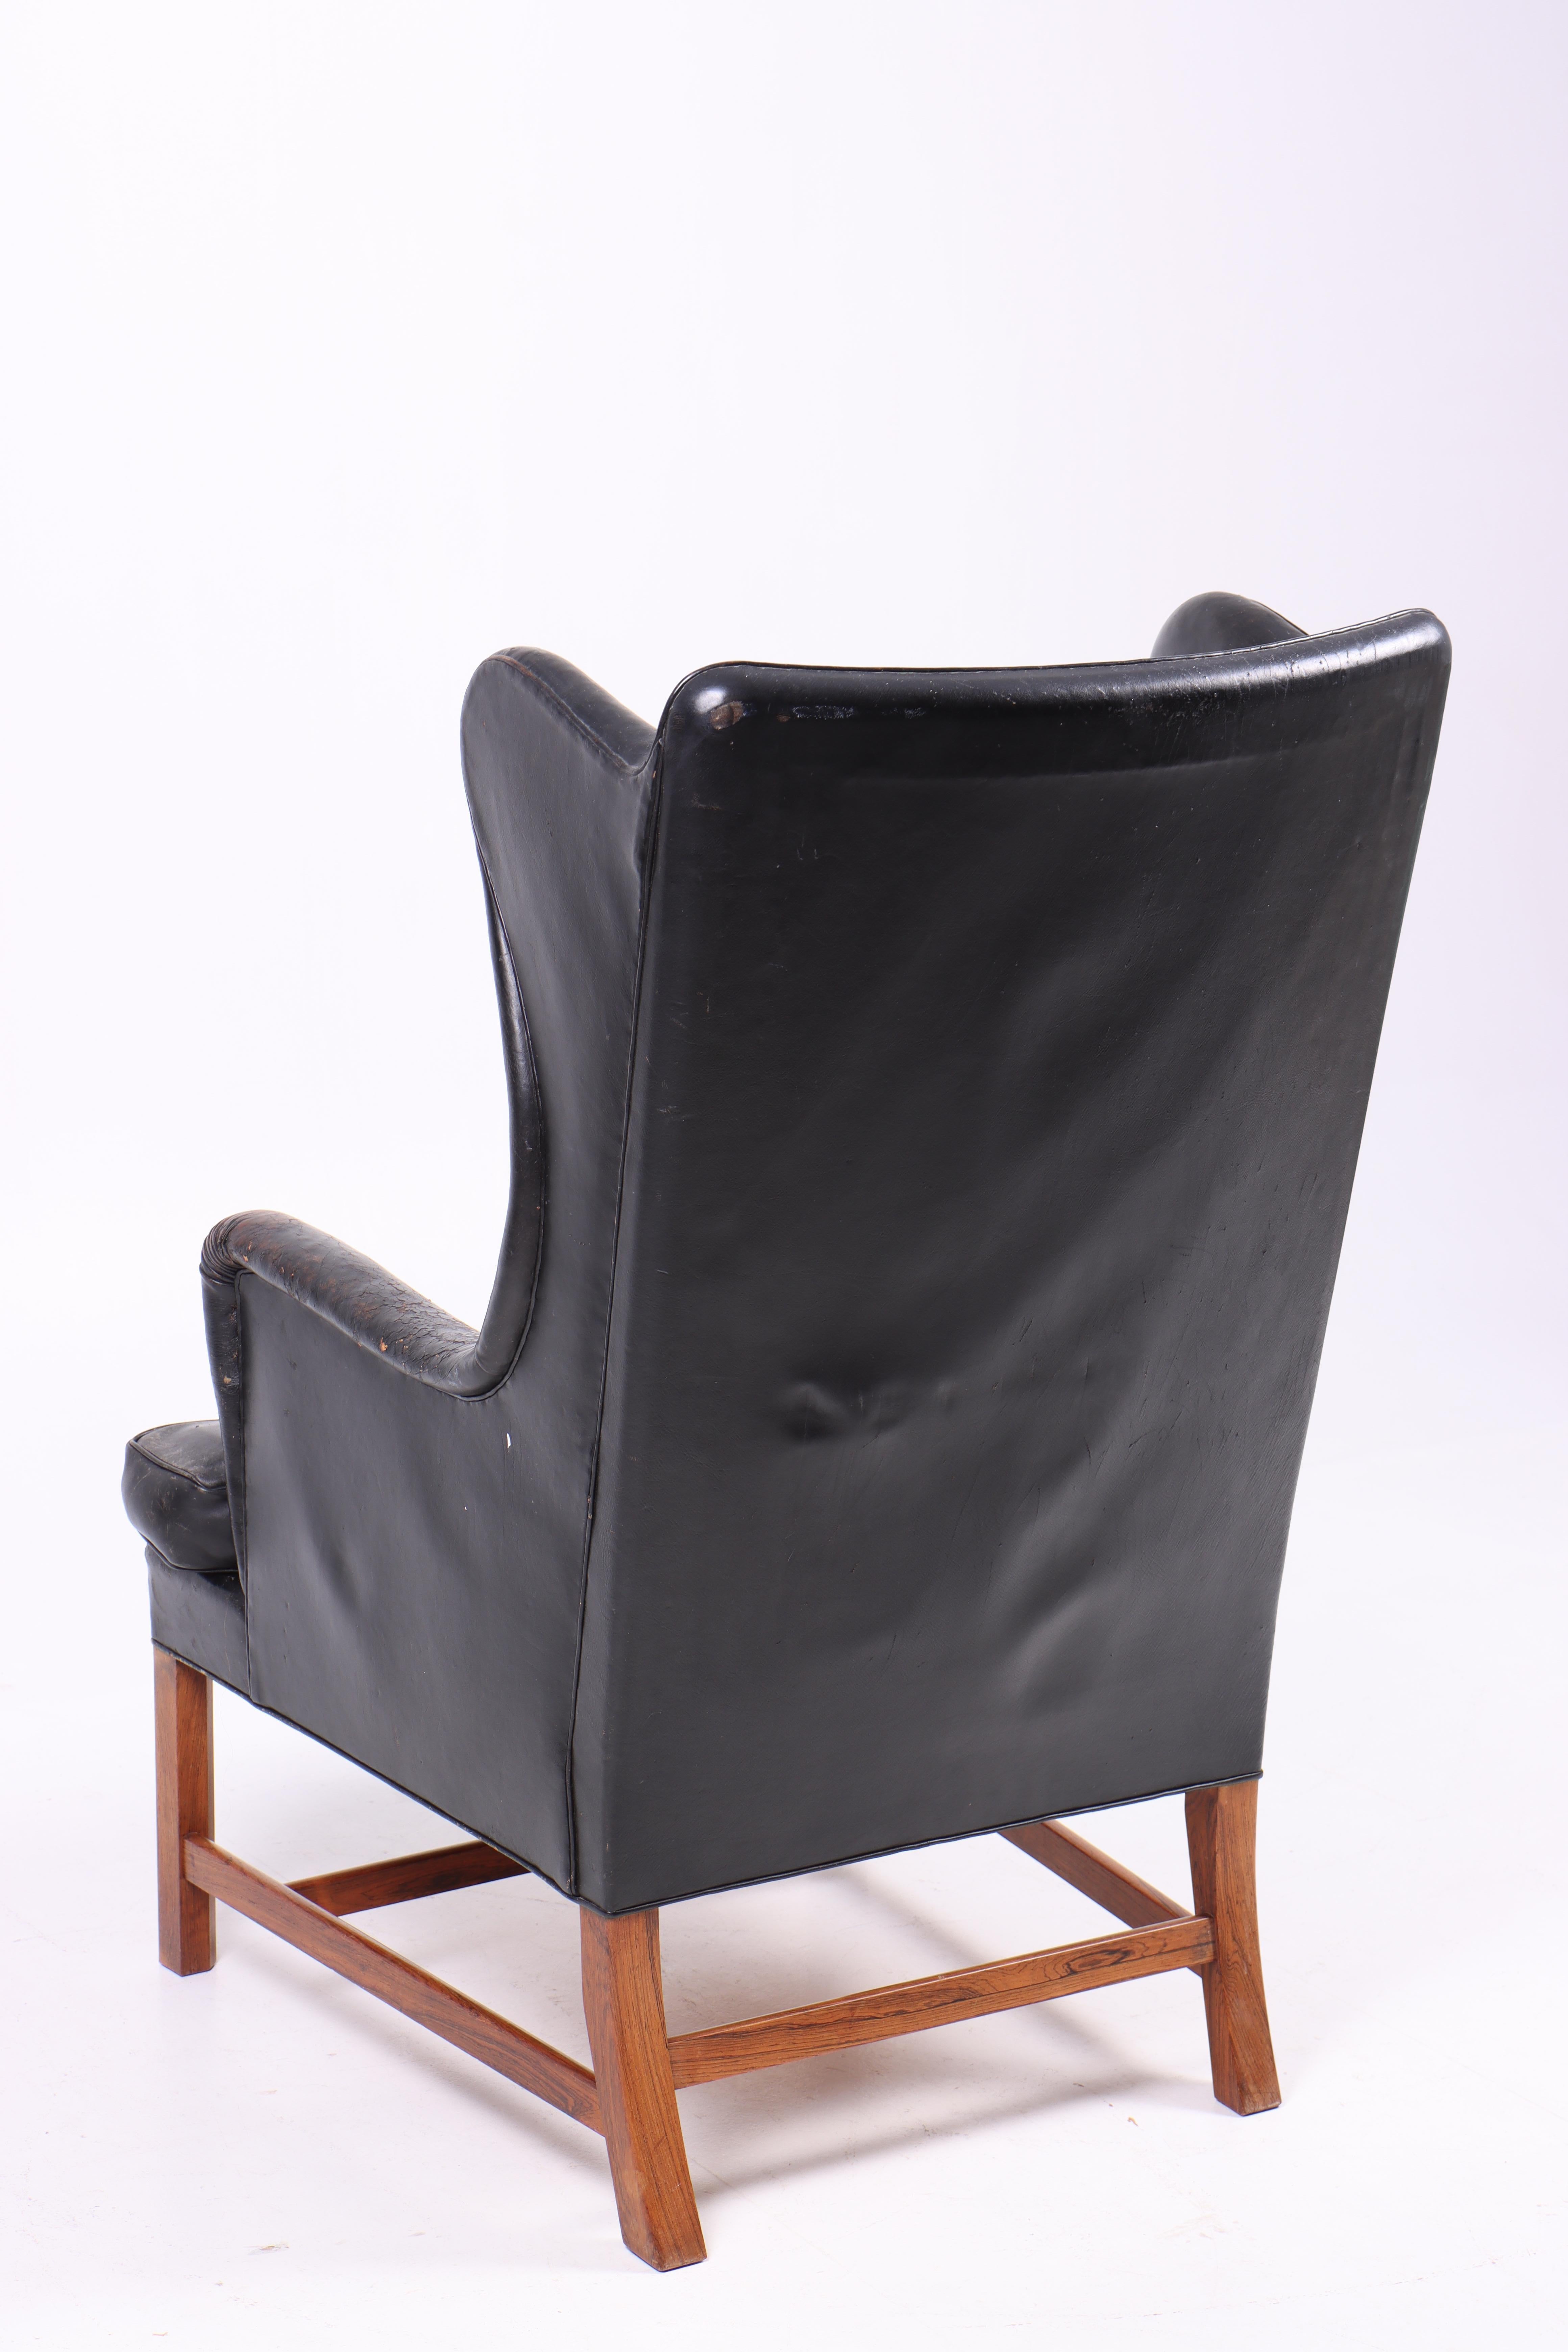 Pristine Wingback Chair in Patinated Leather by Kaare Klint, 1940s For Sale 2